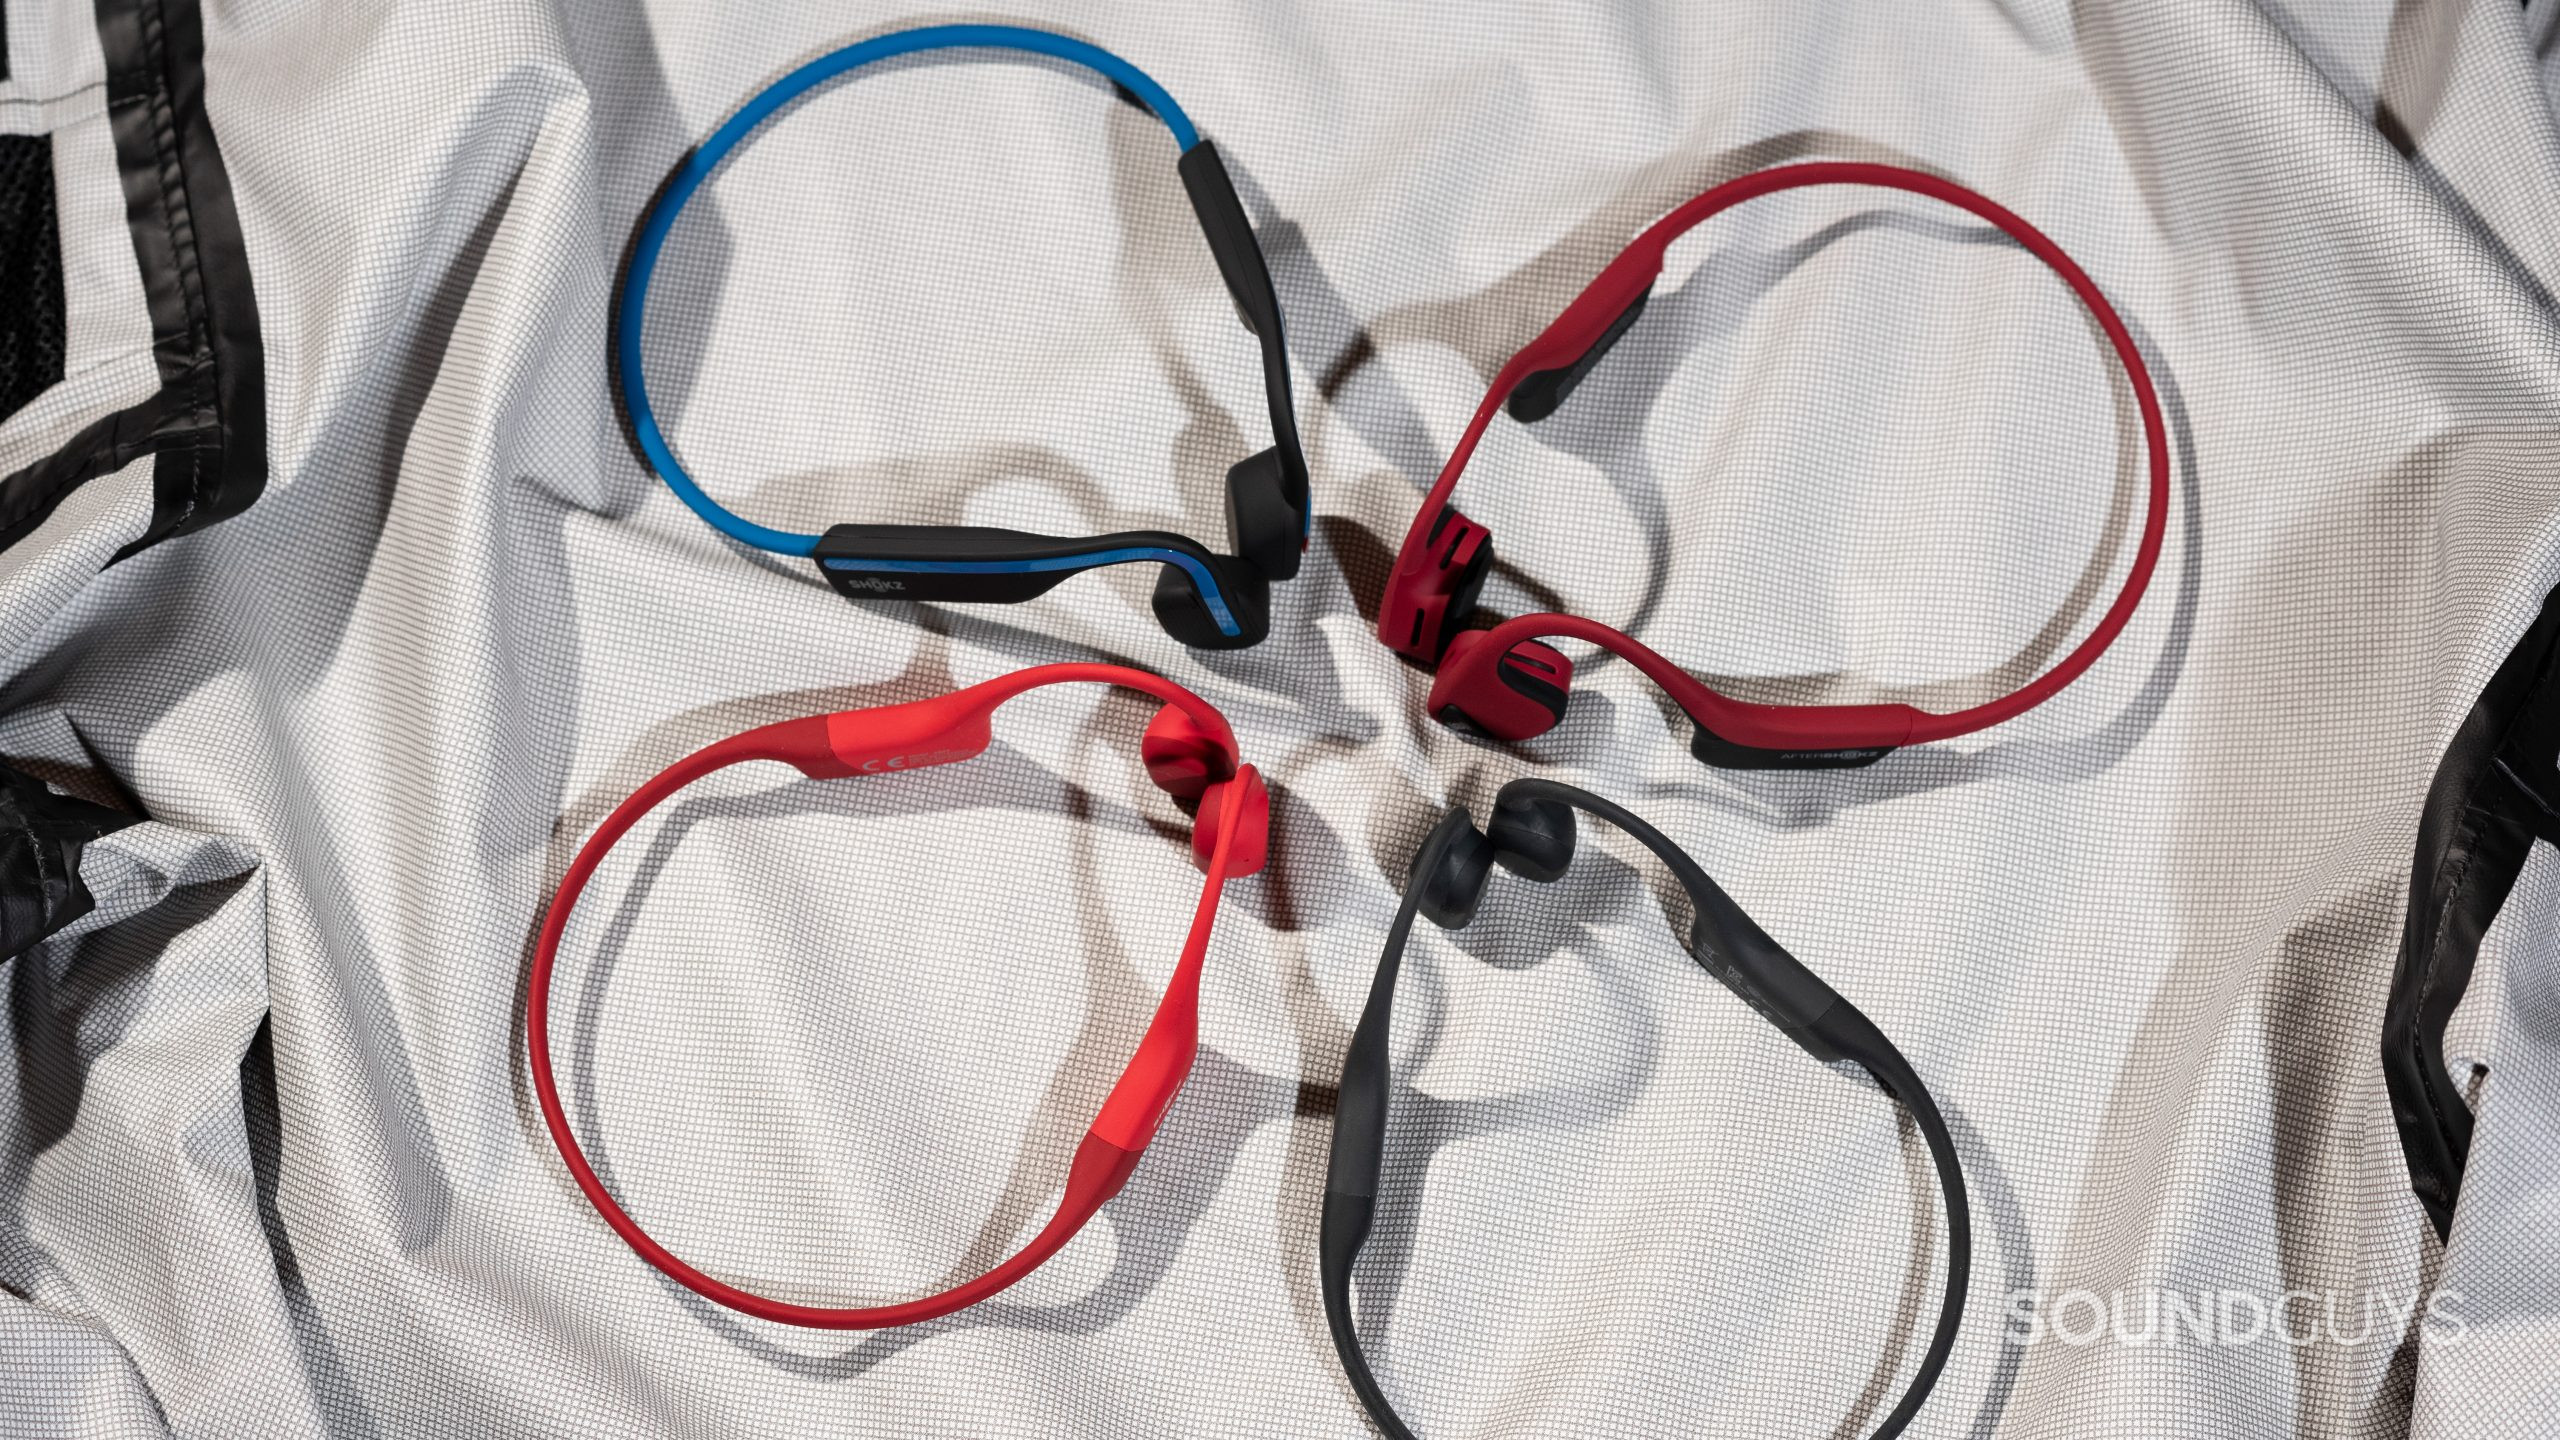 A selection of Shokz/AfterShokz bone conduction headphones in a circle, including the OpenRun, OpenMove, Air, and Aeropex.